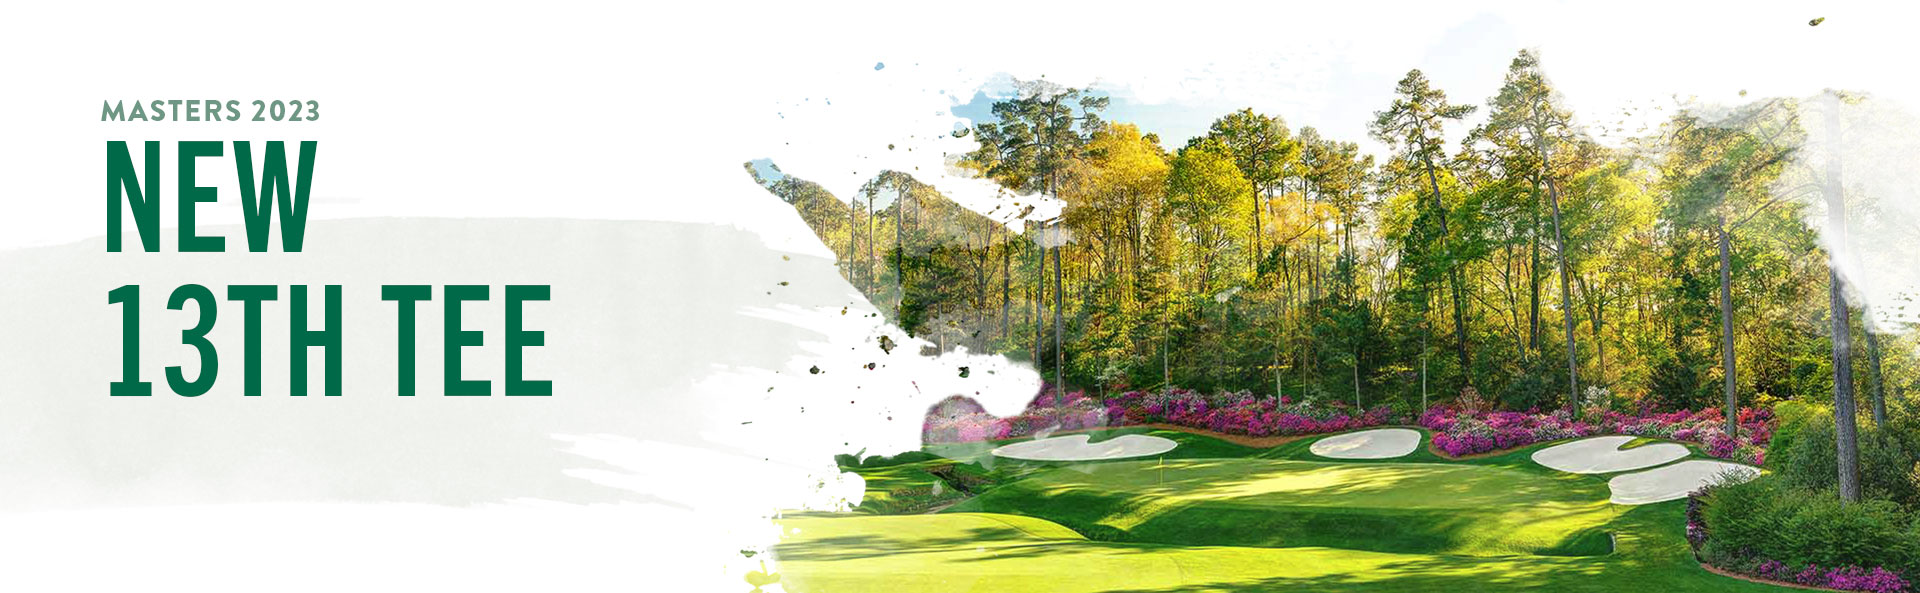 The Masters 2023 - New 13th Tee